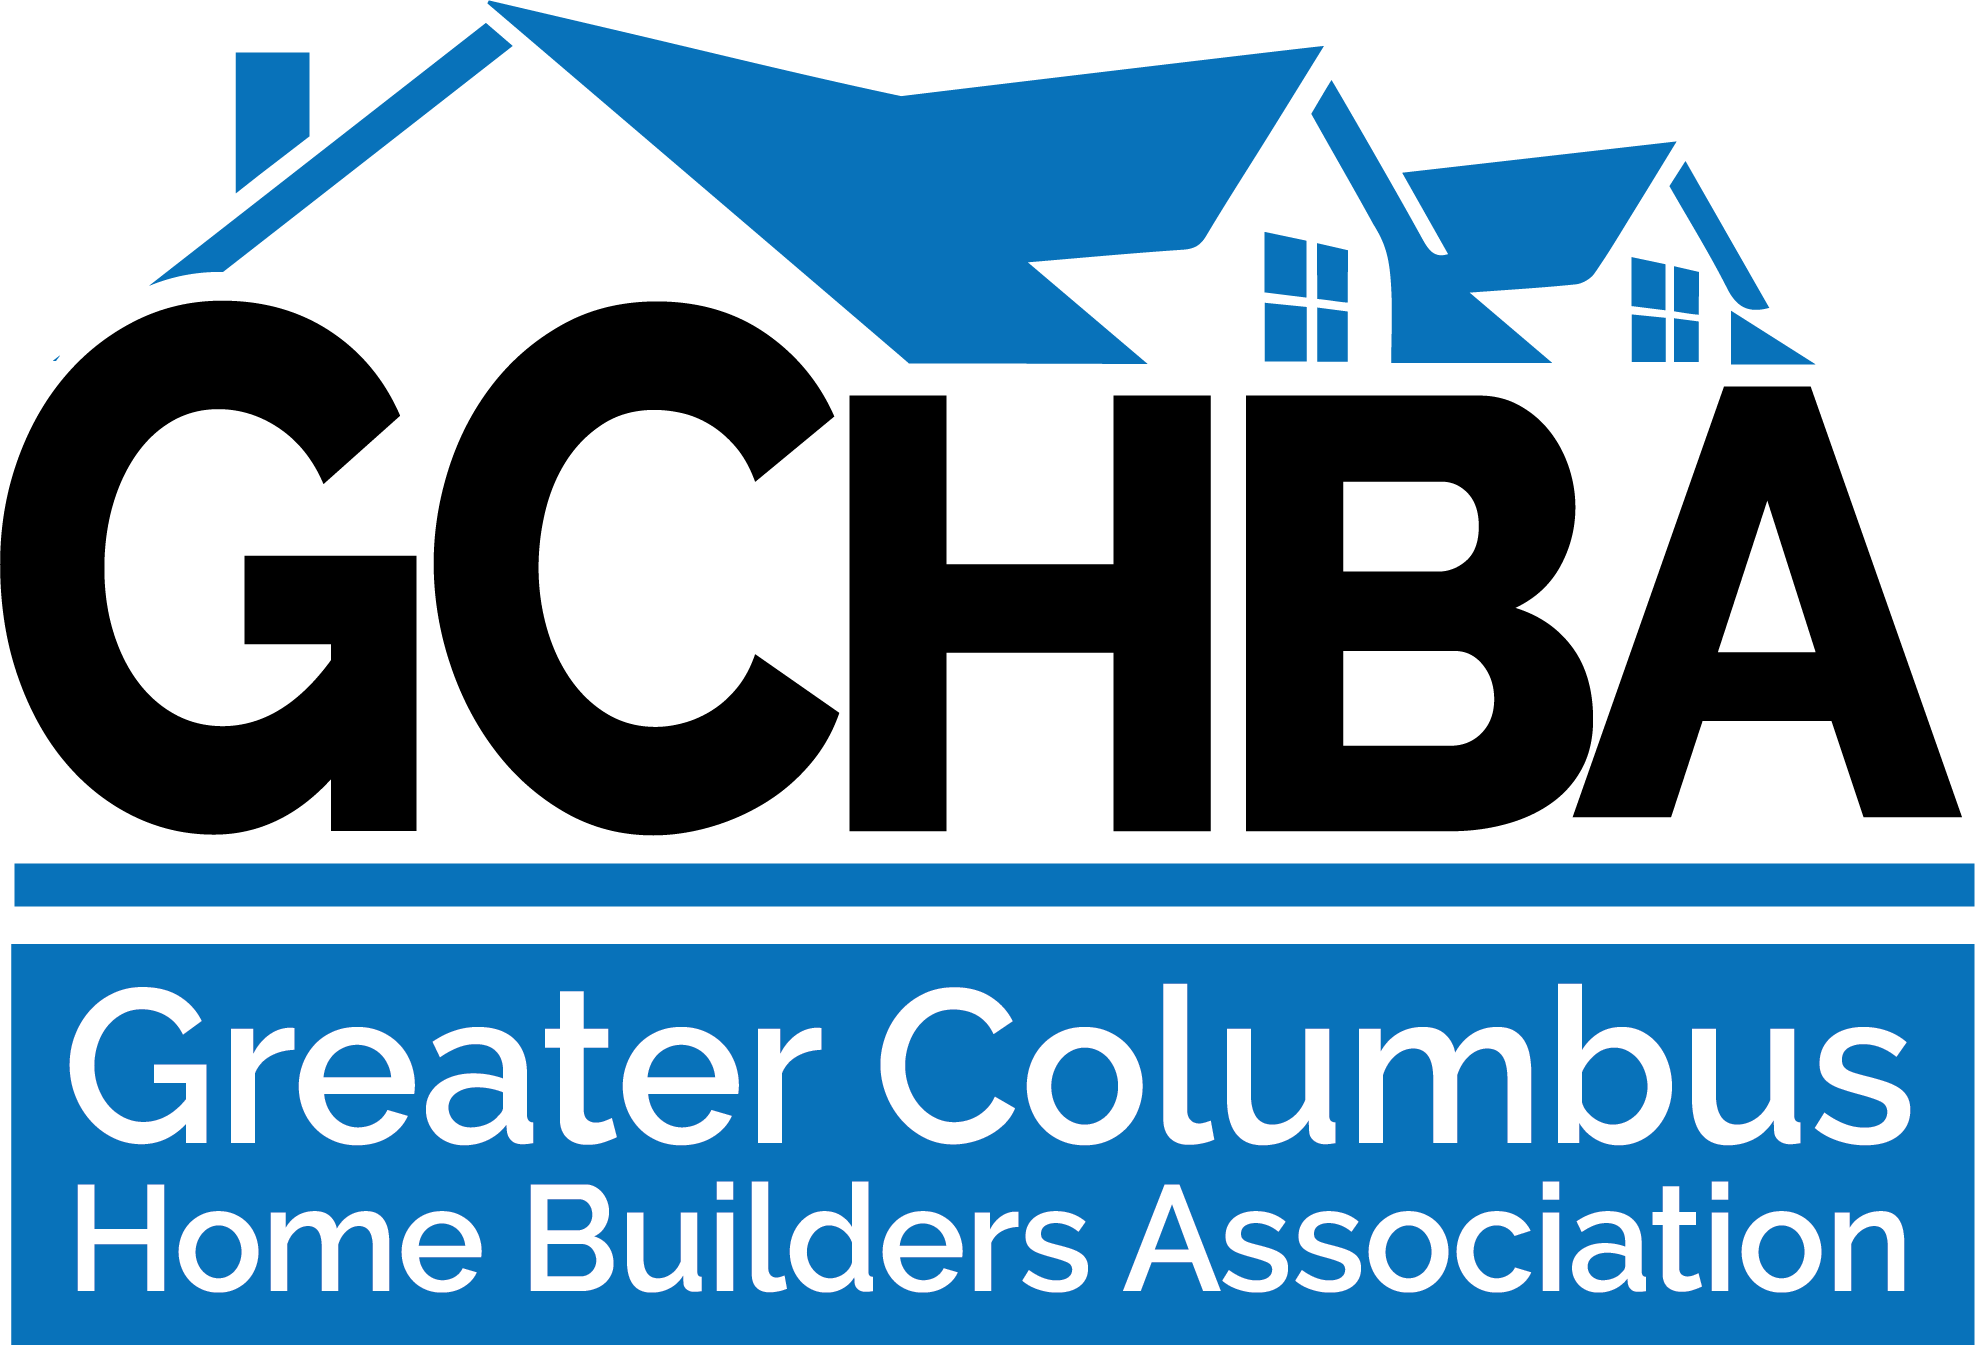 Greater Columbus Home Builders Association